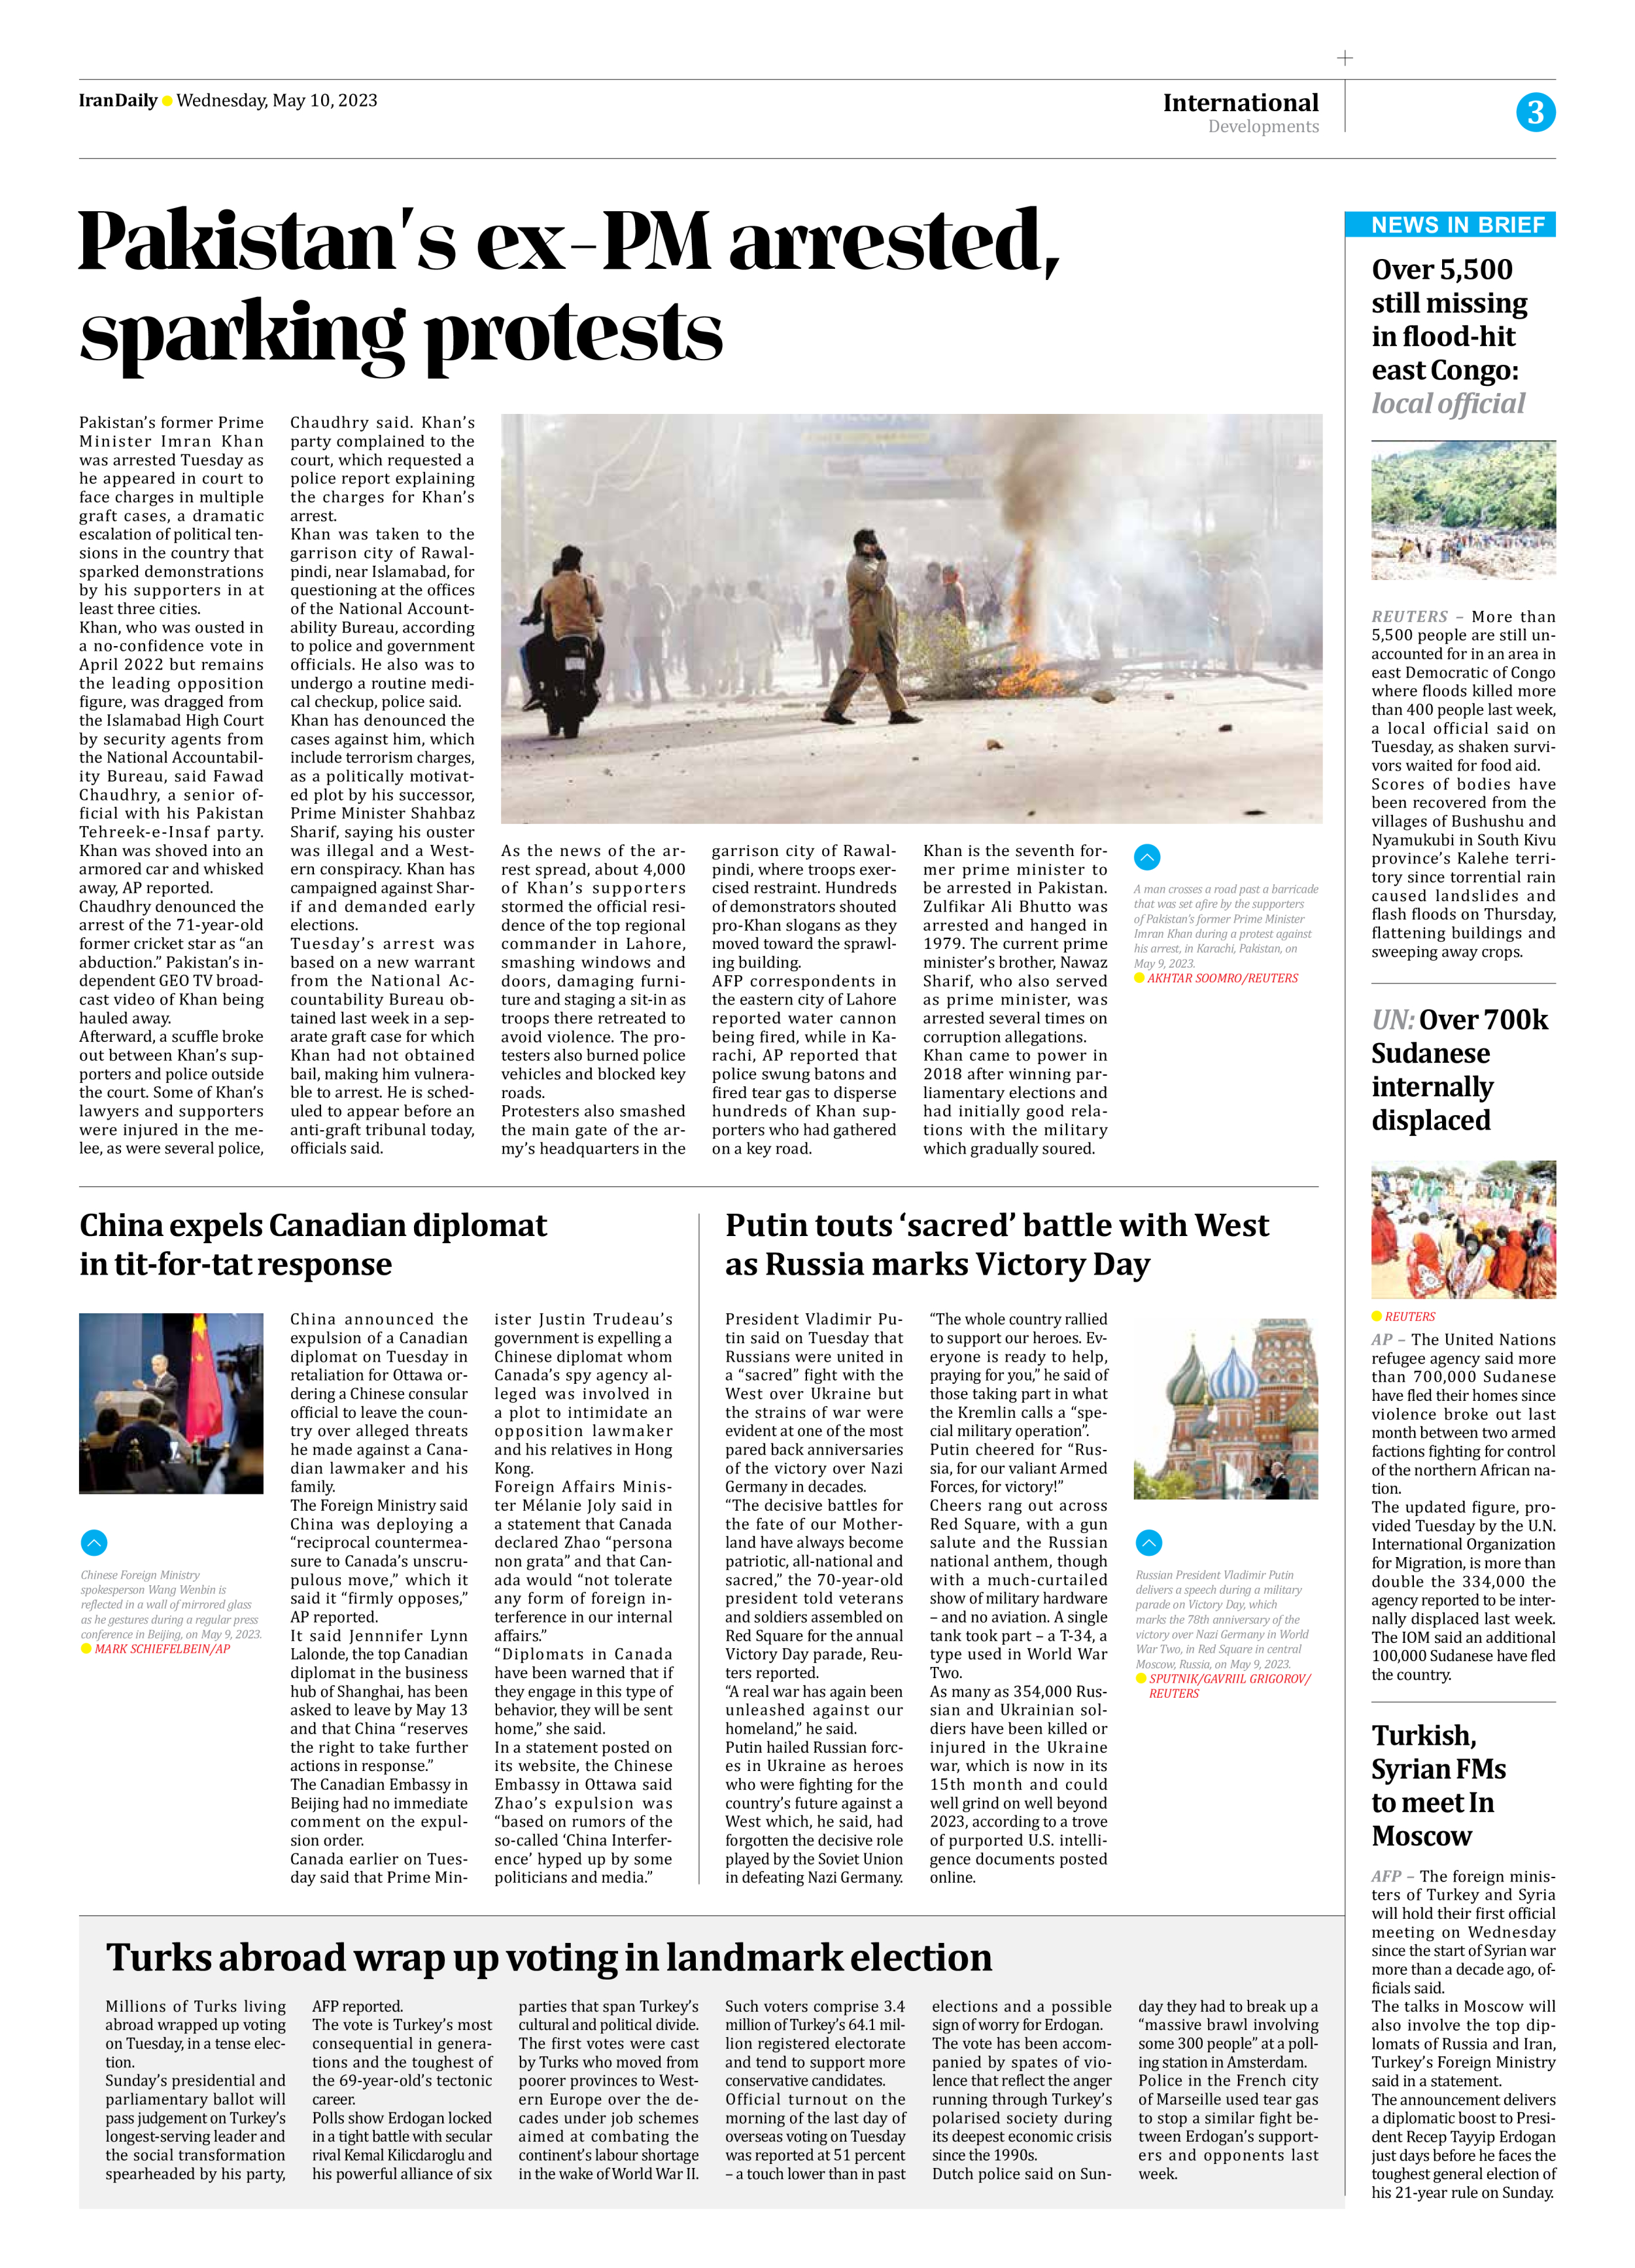 Iran Daily - Number Seven Thousand Two Hundred and Eighty Eight - 10 May 2023 - Page 3